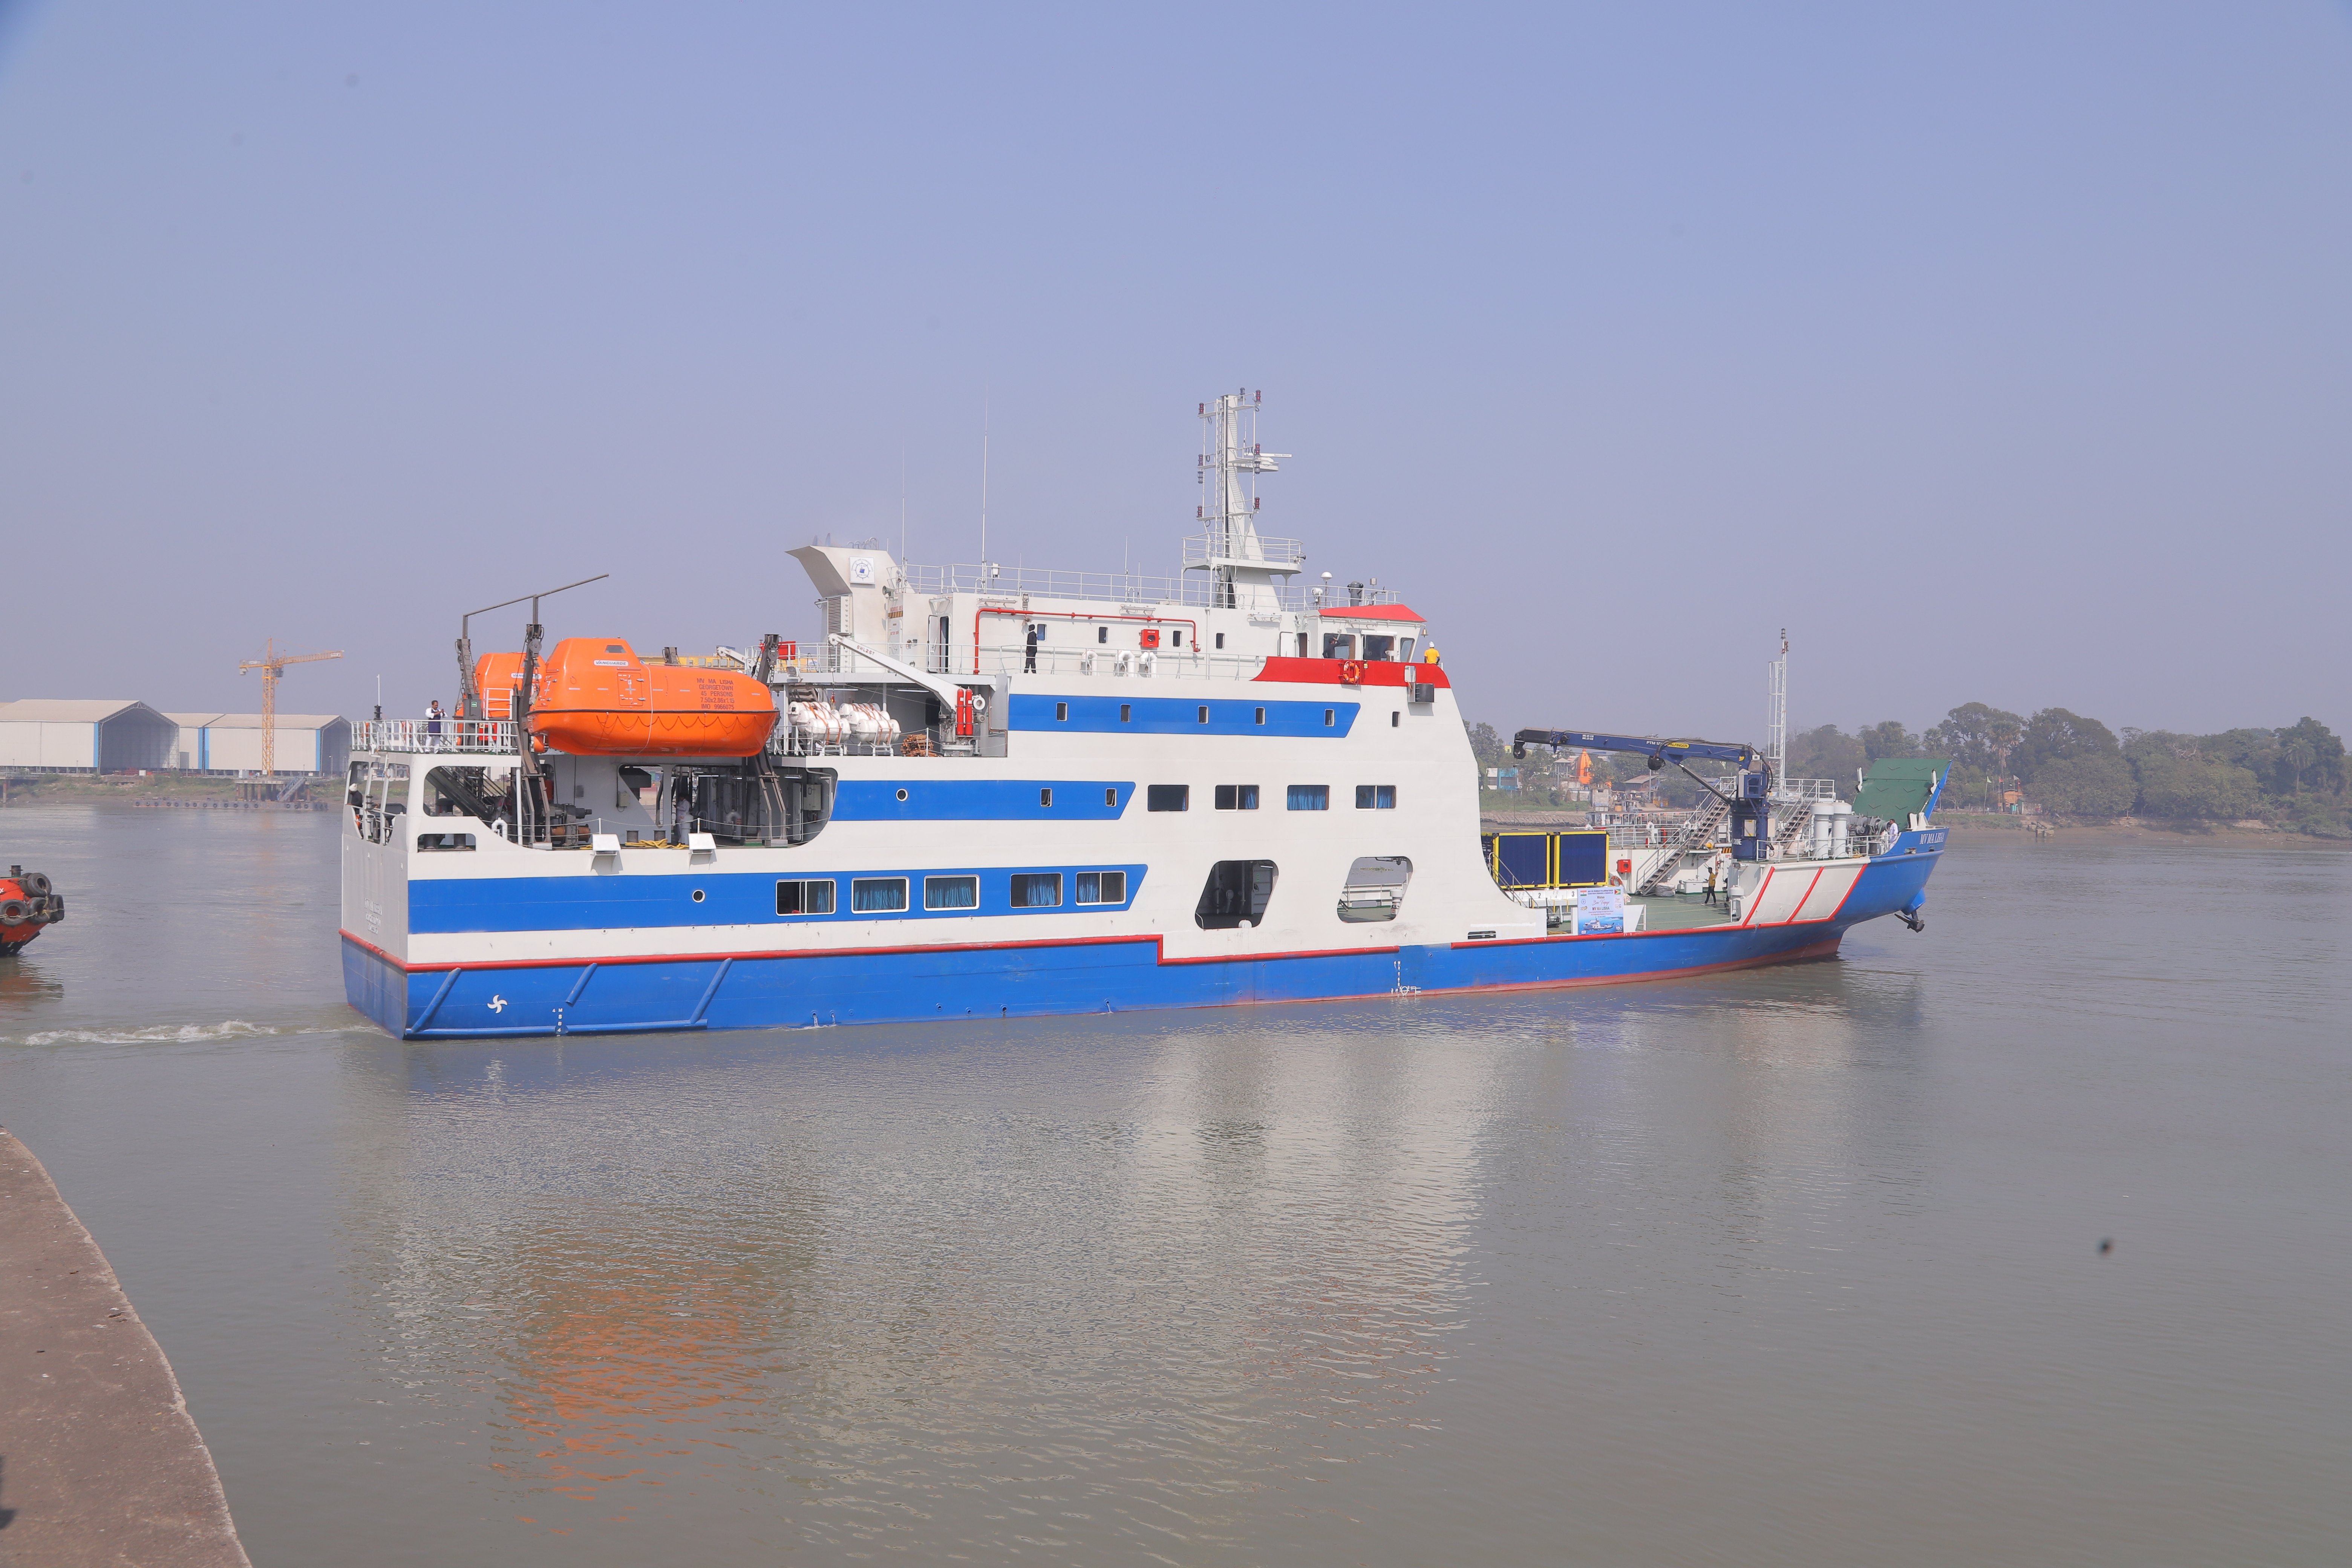 BON VOYAGE MV MA Lisha- Flagging Off of GRSE�s In-House Designed Ocean Going Passenger & Cargo Ferry Vessel to The Cooperative Republic of Guyana on 12 Jan 23